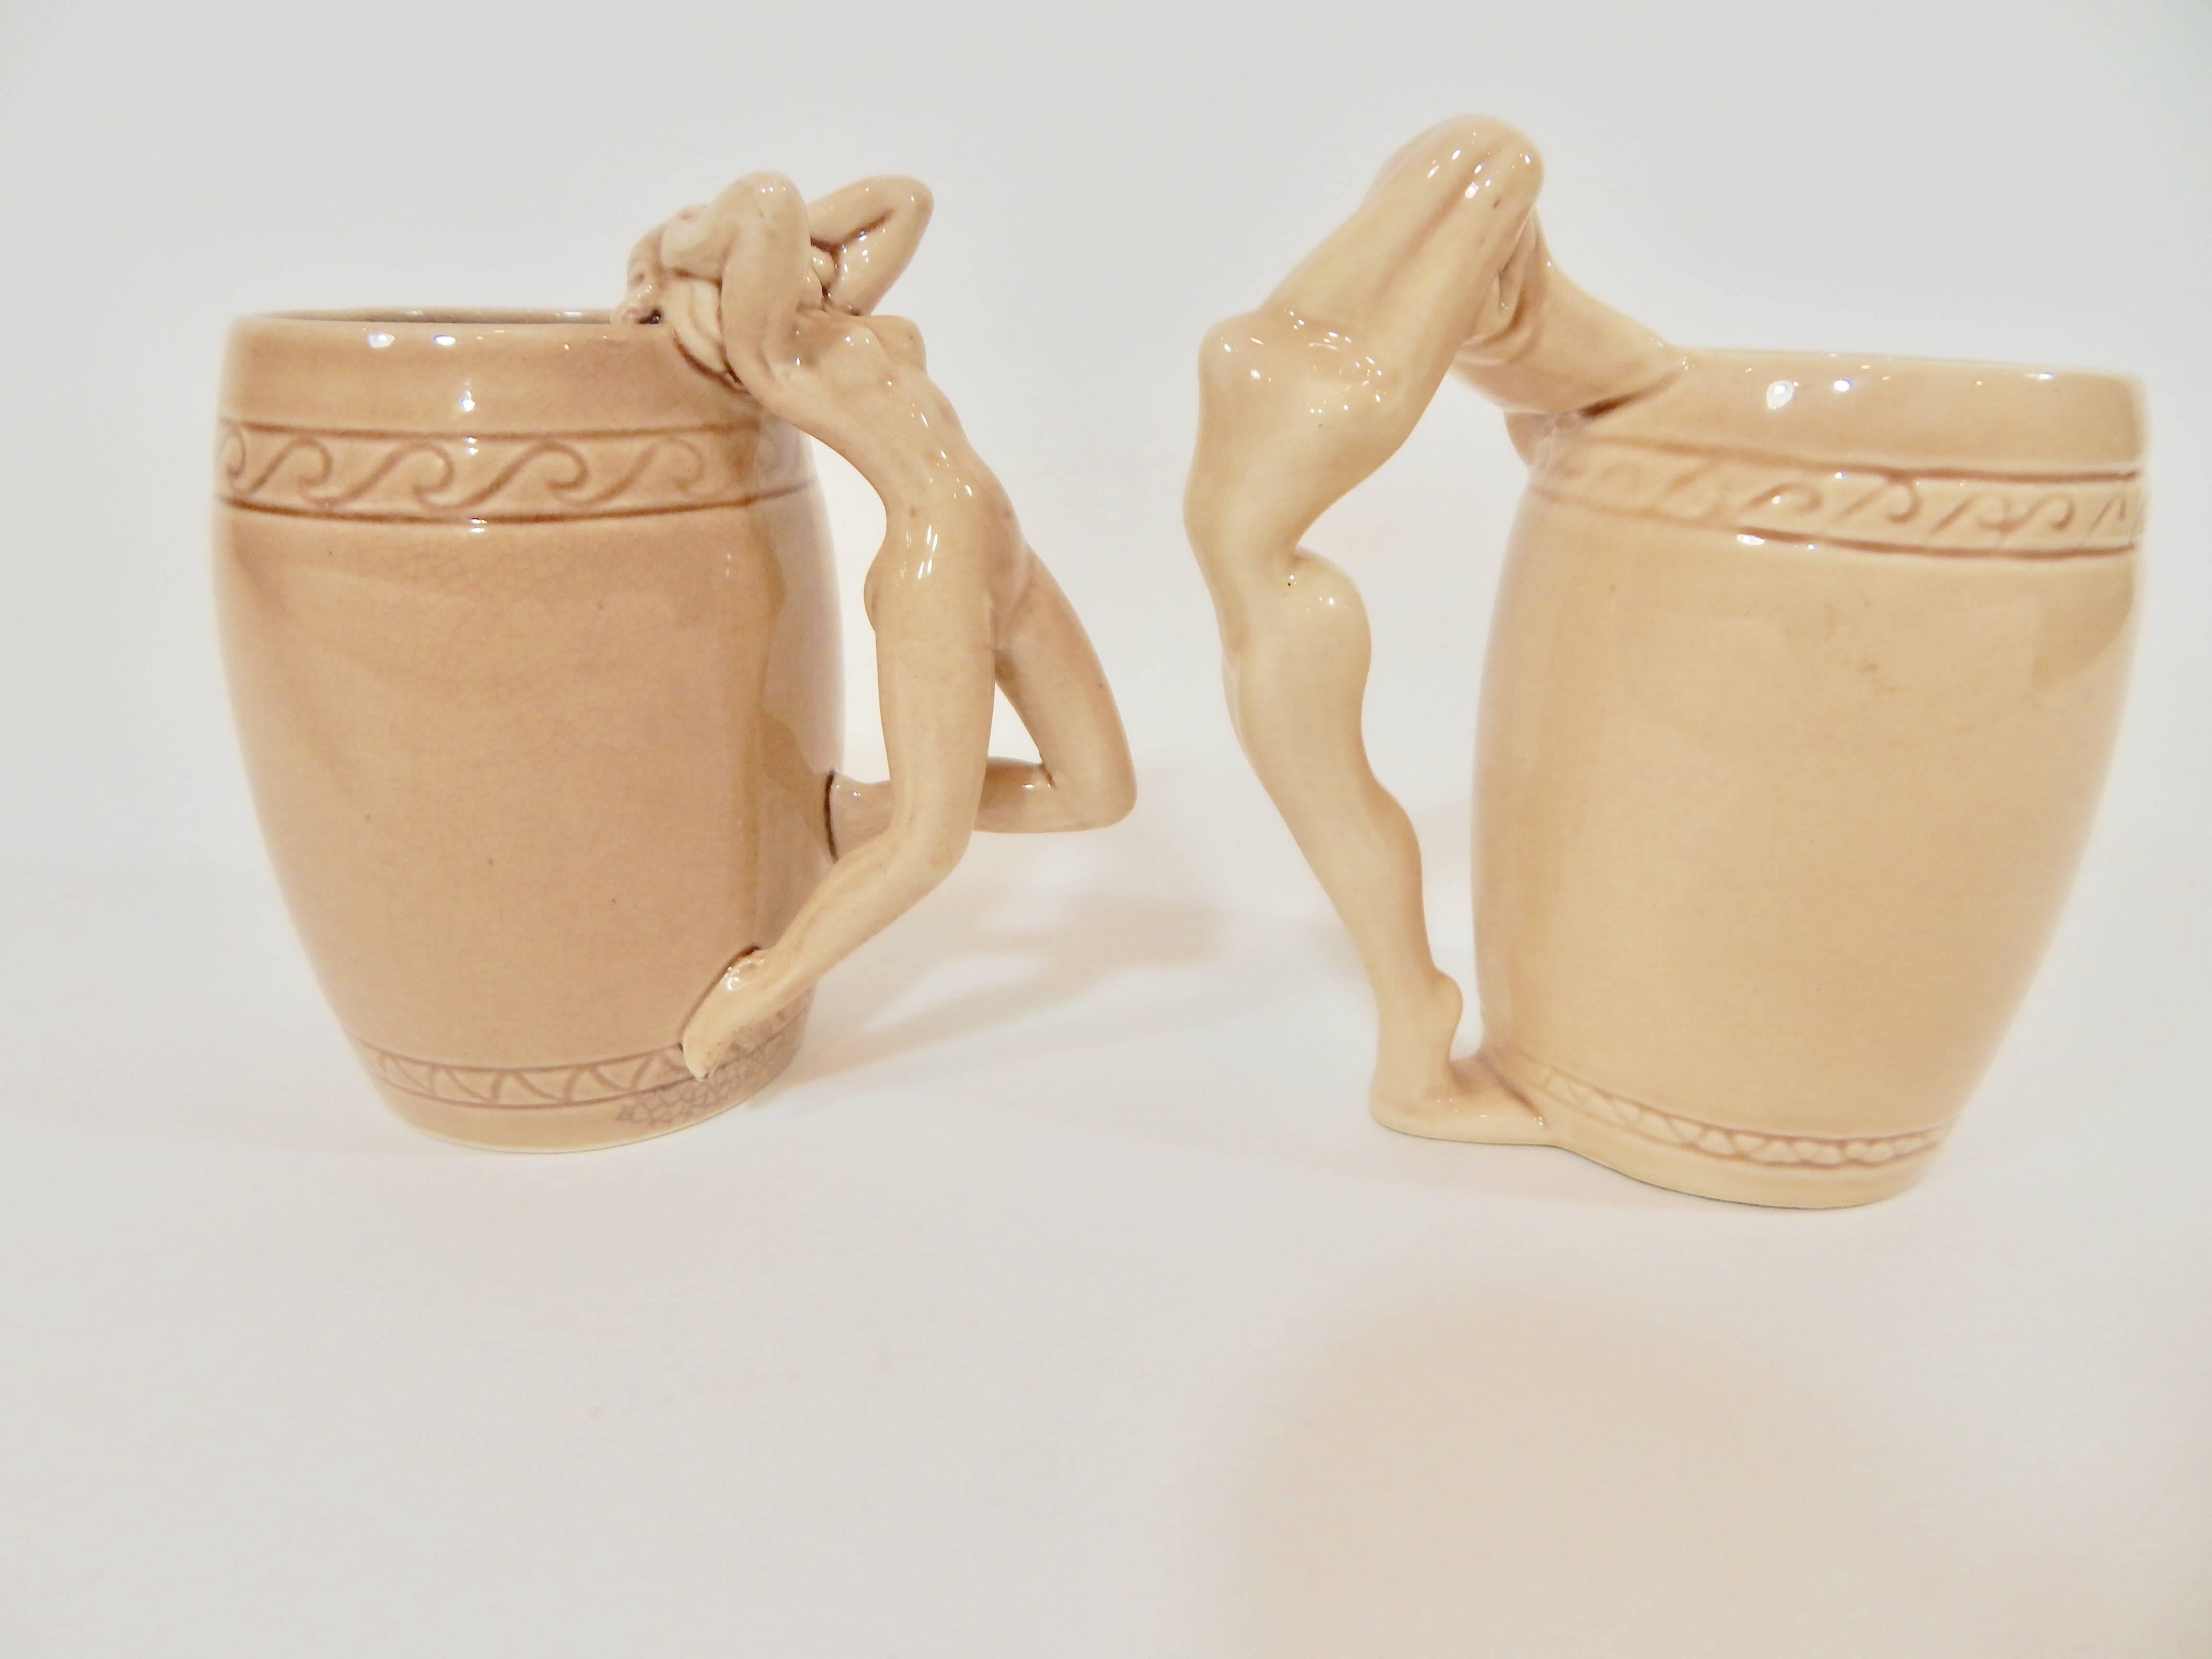 1940s signed pair of glazed ceramic nude mugs by Dorothy Kindell (1909-1961) known as the naughty potter for her 